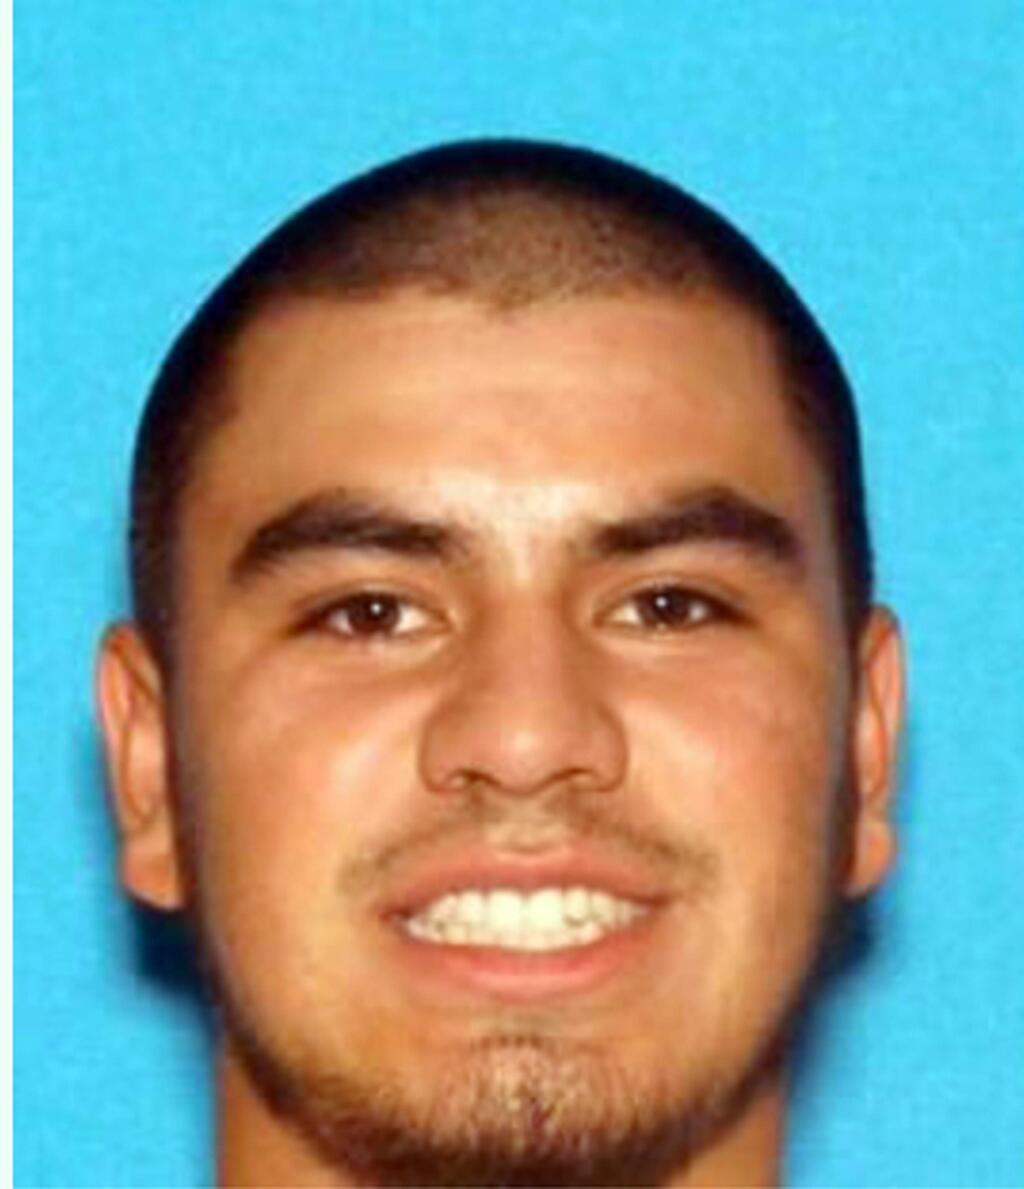 This undated photo provided by the California Highway Patrol shows Fernando Castro. Castro is the subject of an Amber Alert as law enforcement agencies in Northern California were frantically searching Thursday, May 26, 2016, for a 15-year-old girl, Pearl Pinson, whom a witness reportedly heard screaming for help as a young man dragged her across a freeway overpass. (California Highway Patrol via AP)